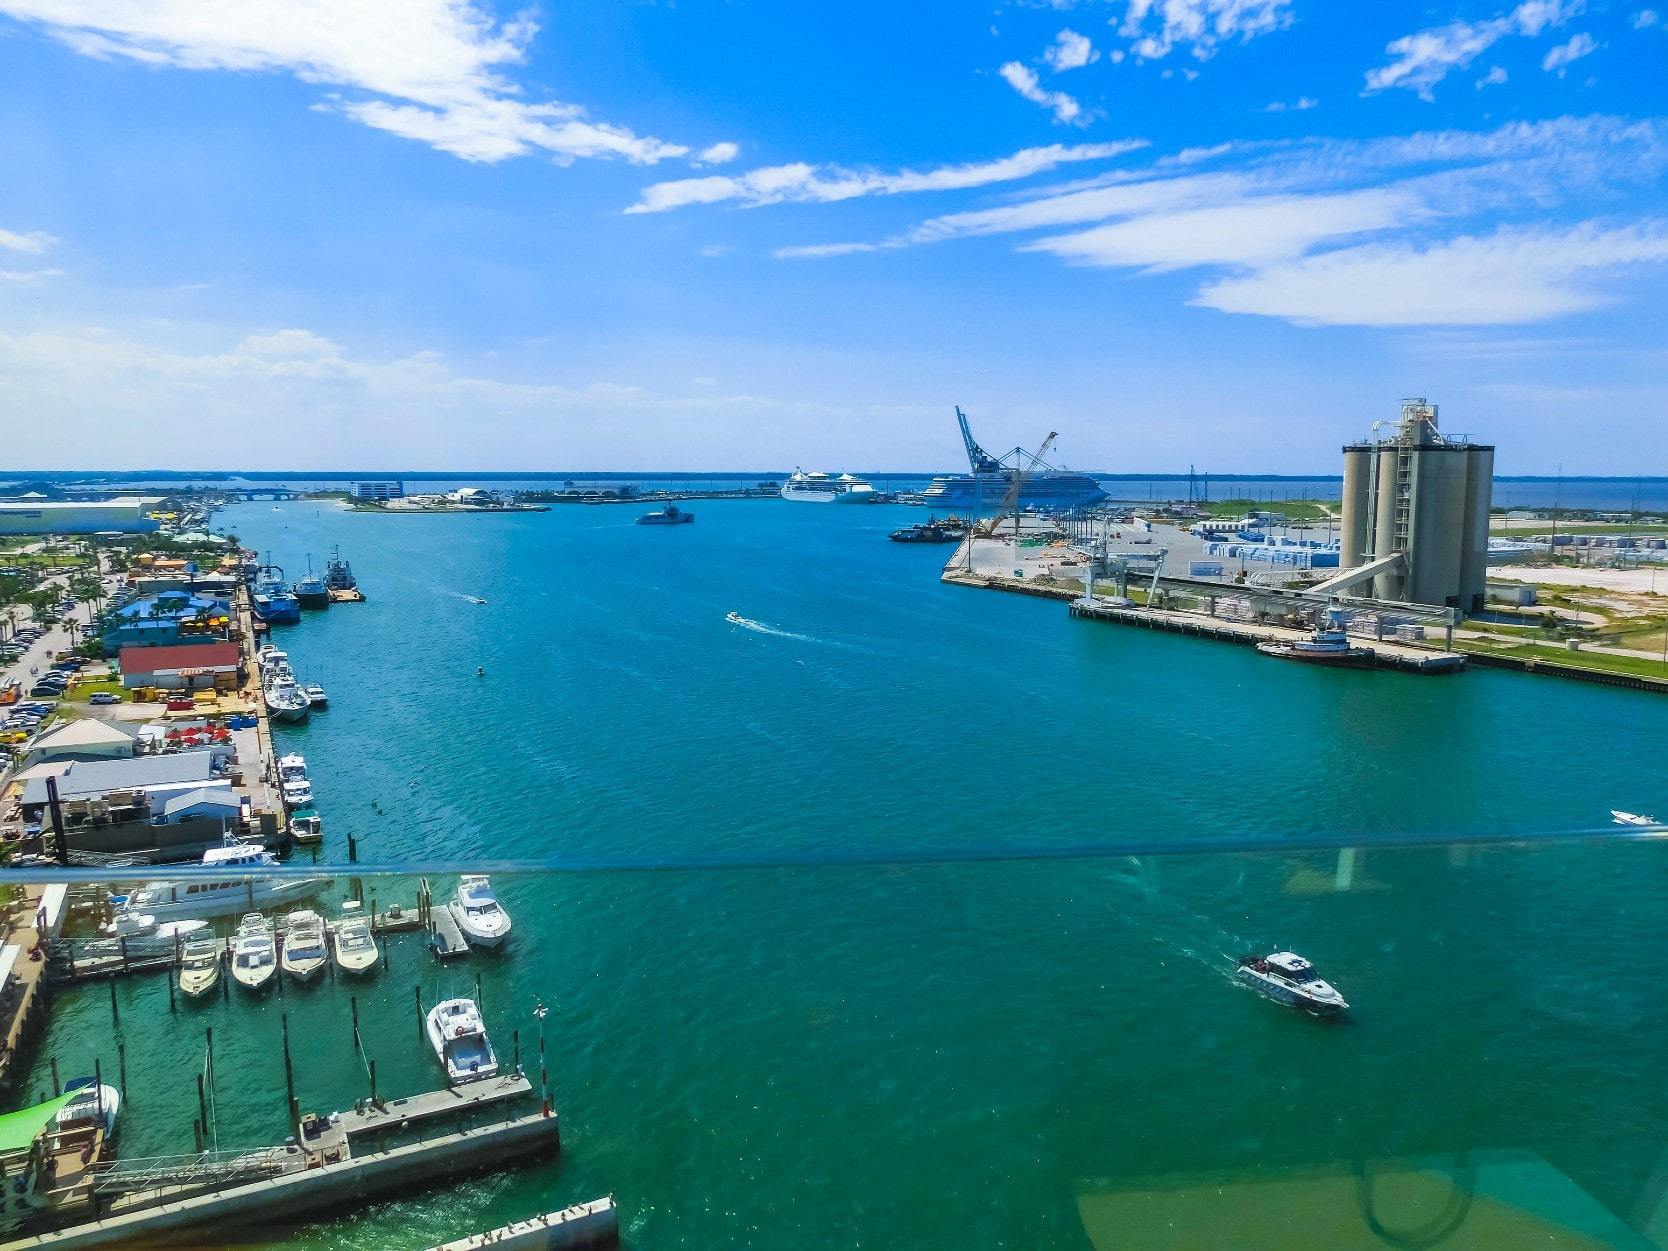 Arial view of Port Canaveral from Cape Canaveral, Florida